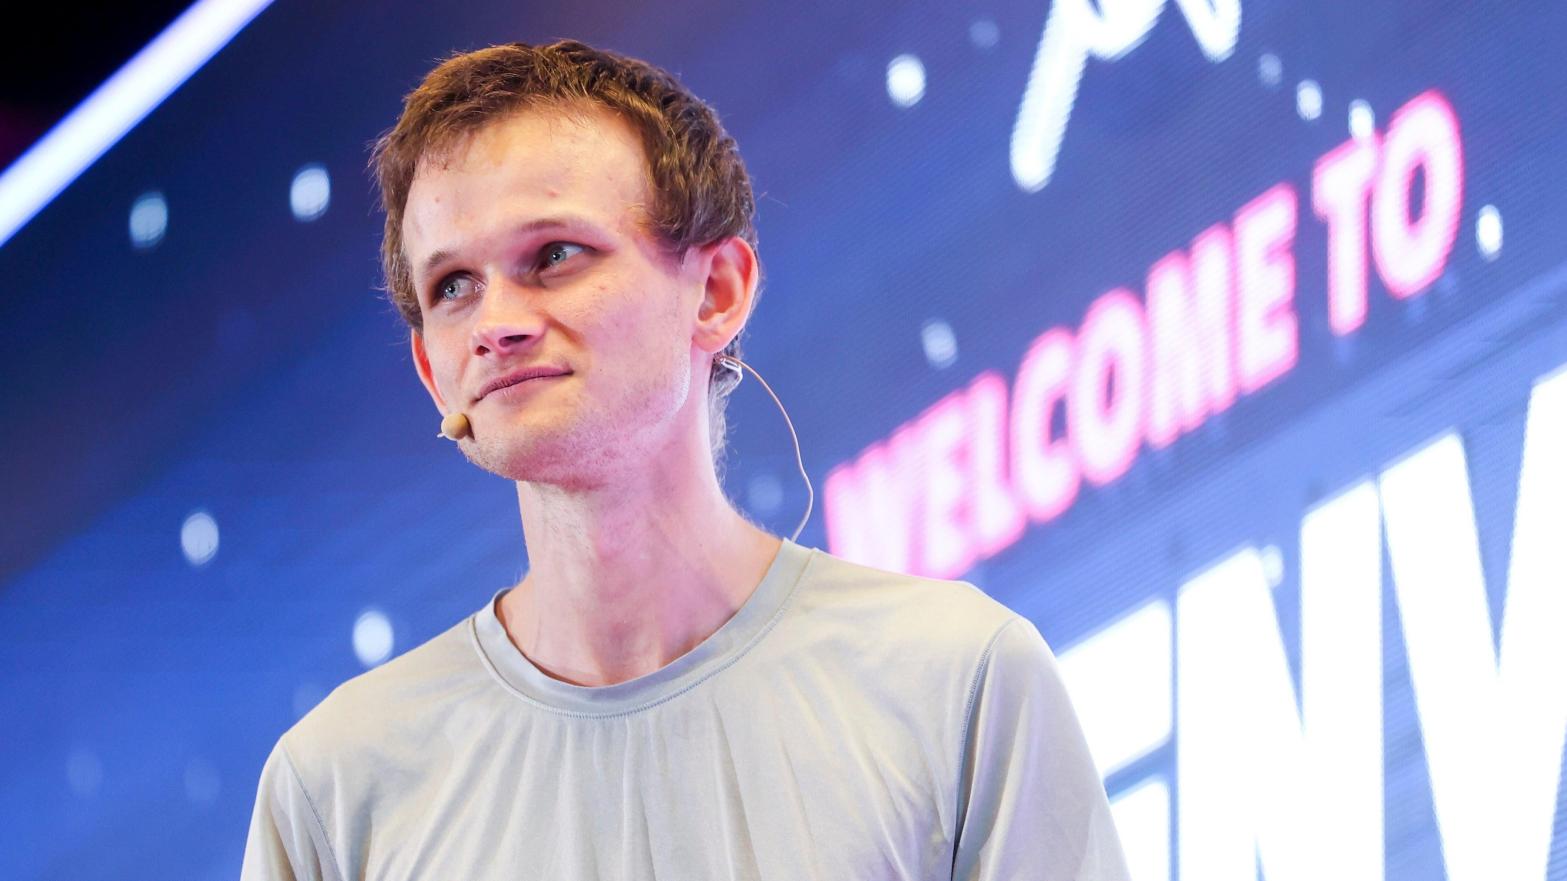 File photo of Ethereum co-founder Vitalik Buterin speaking at ETHDenver on February 18, 2022 in Denver, Colorado. (Photo: Michael Ciaglo, Getty Images)